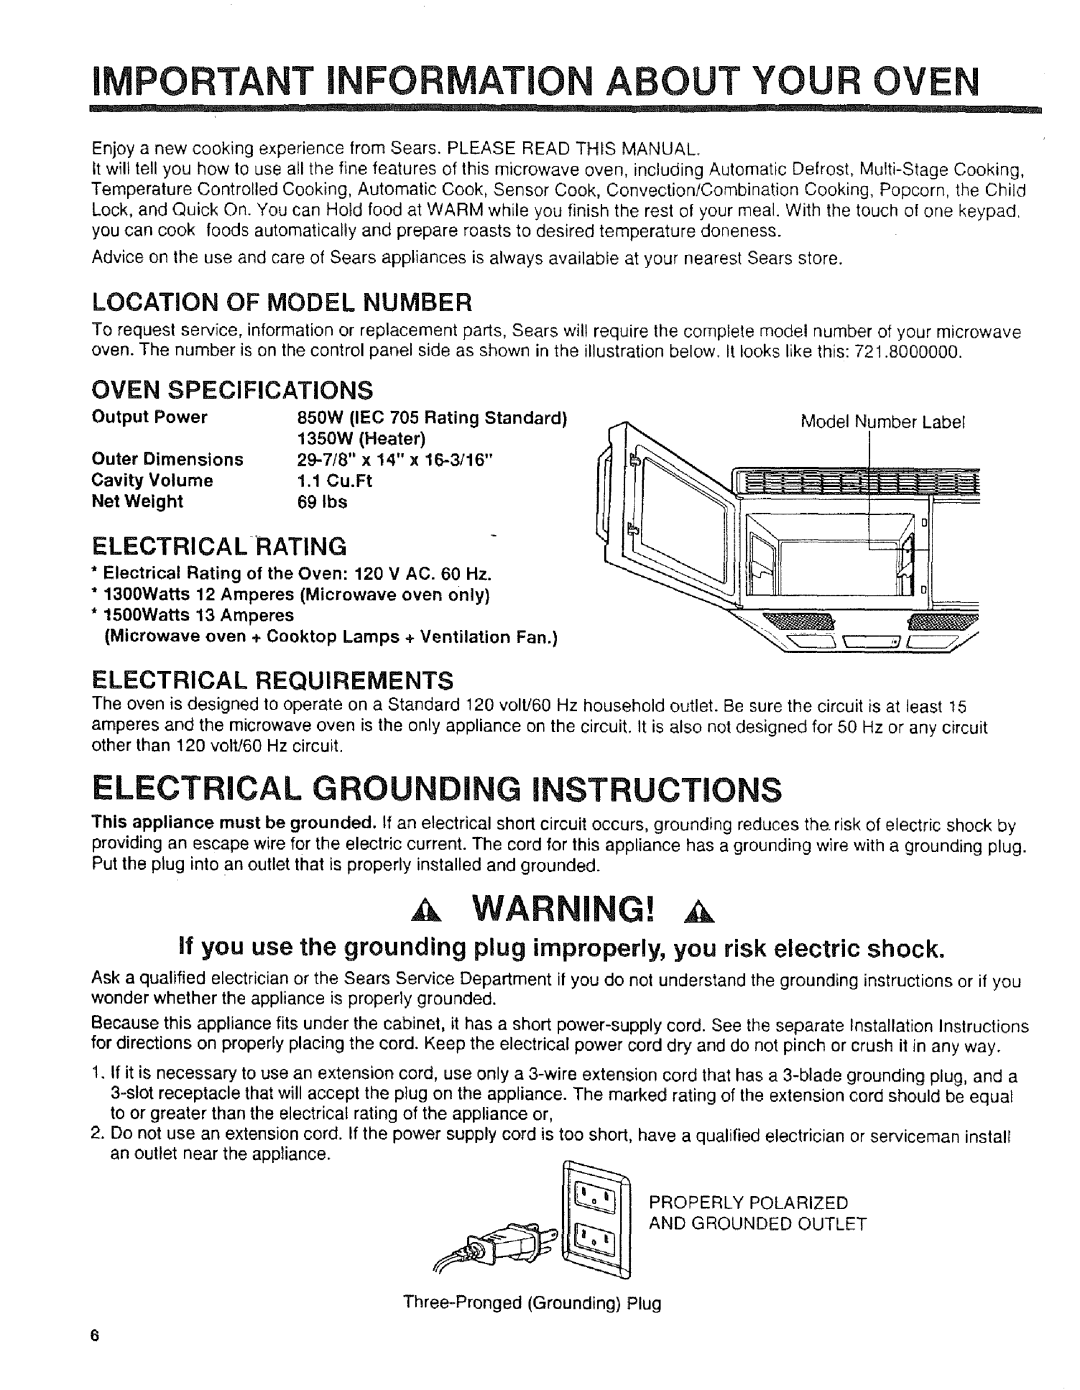 Sears 89952, 89951 manual iMPORTANT INFORMATION ABOUT YOUR OVEN, ELECTRICAL GROUNDING iNSTRUCTIONS, Location Of Model Number 